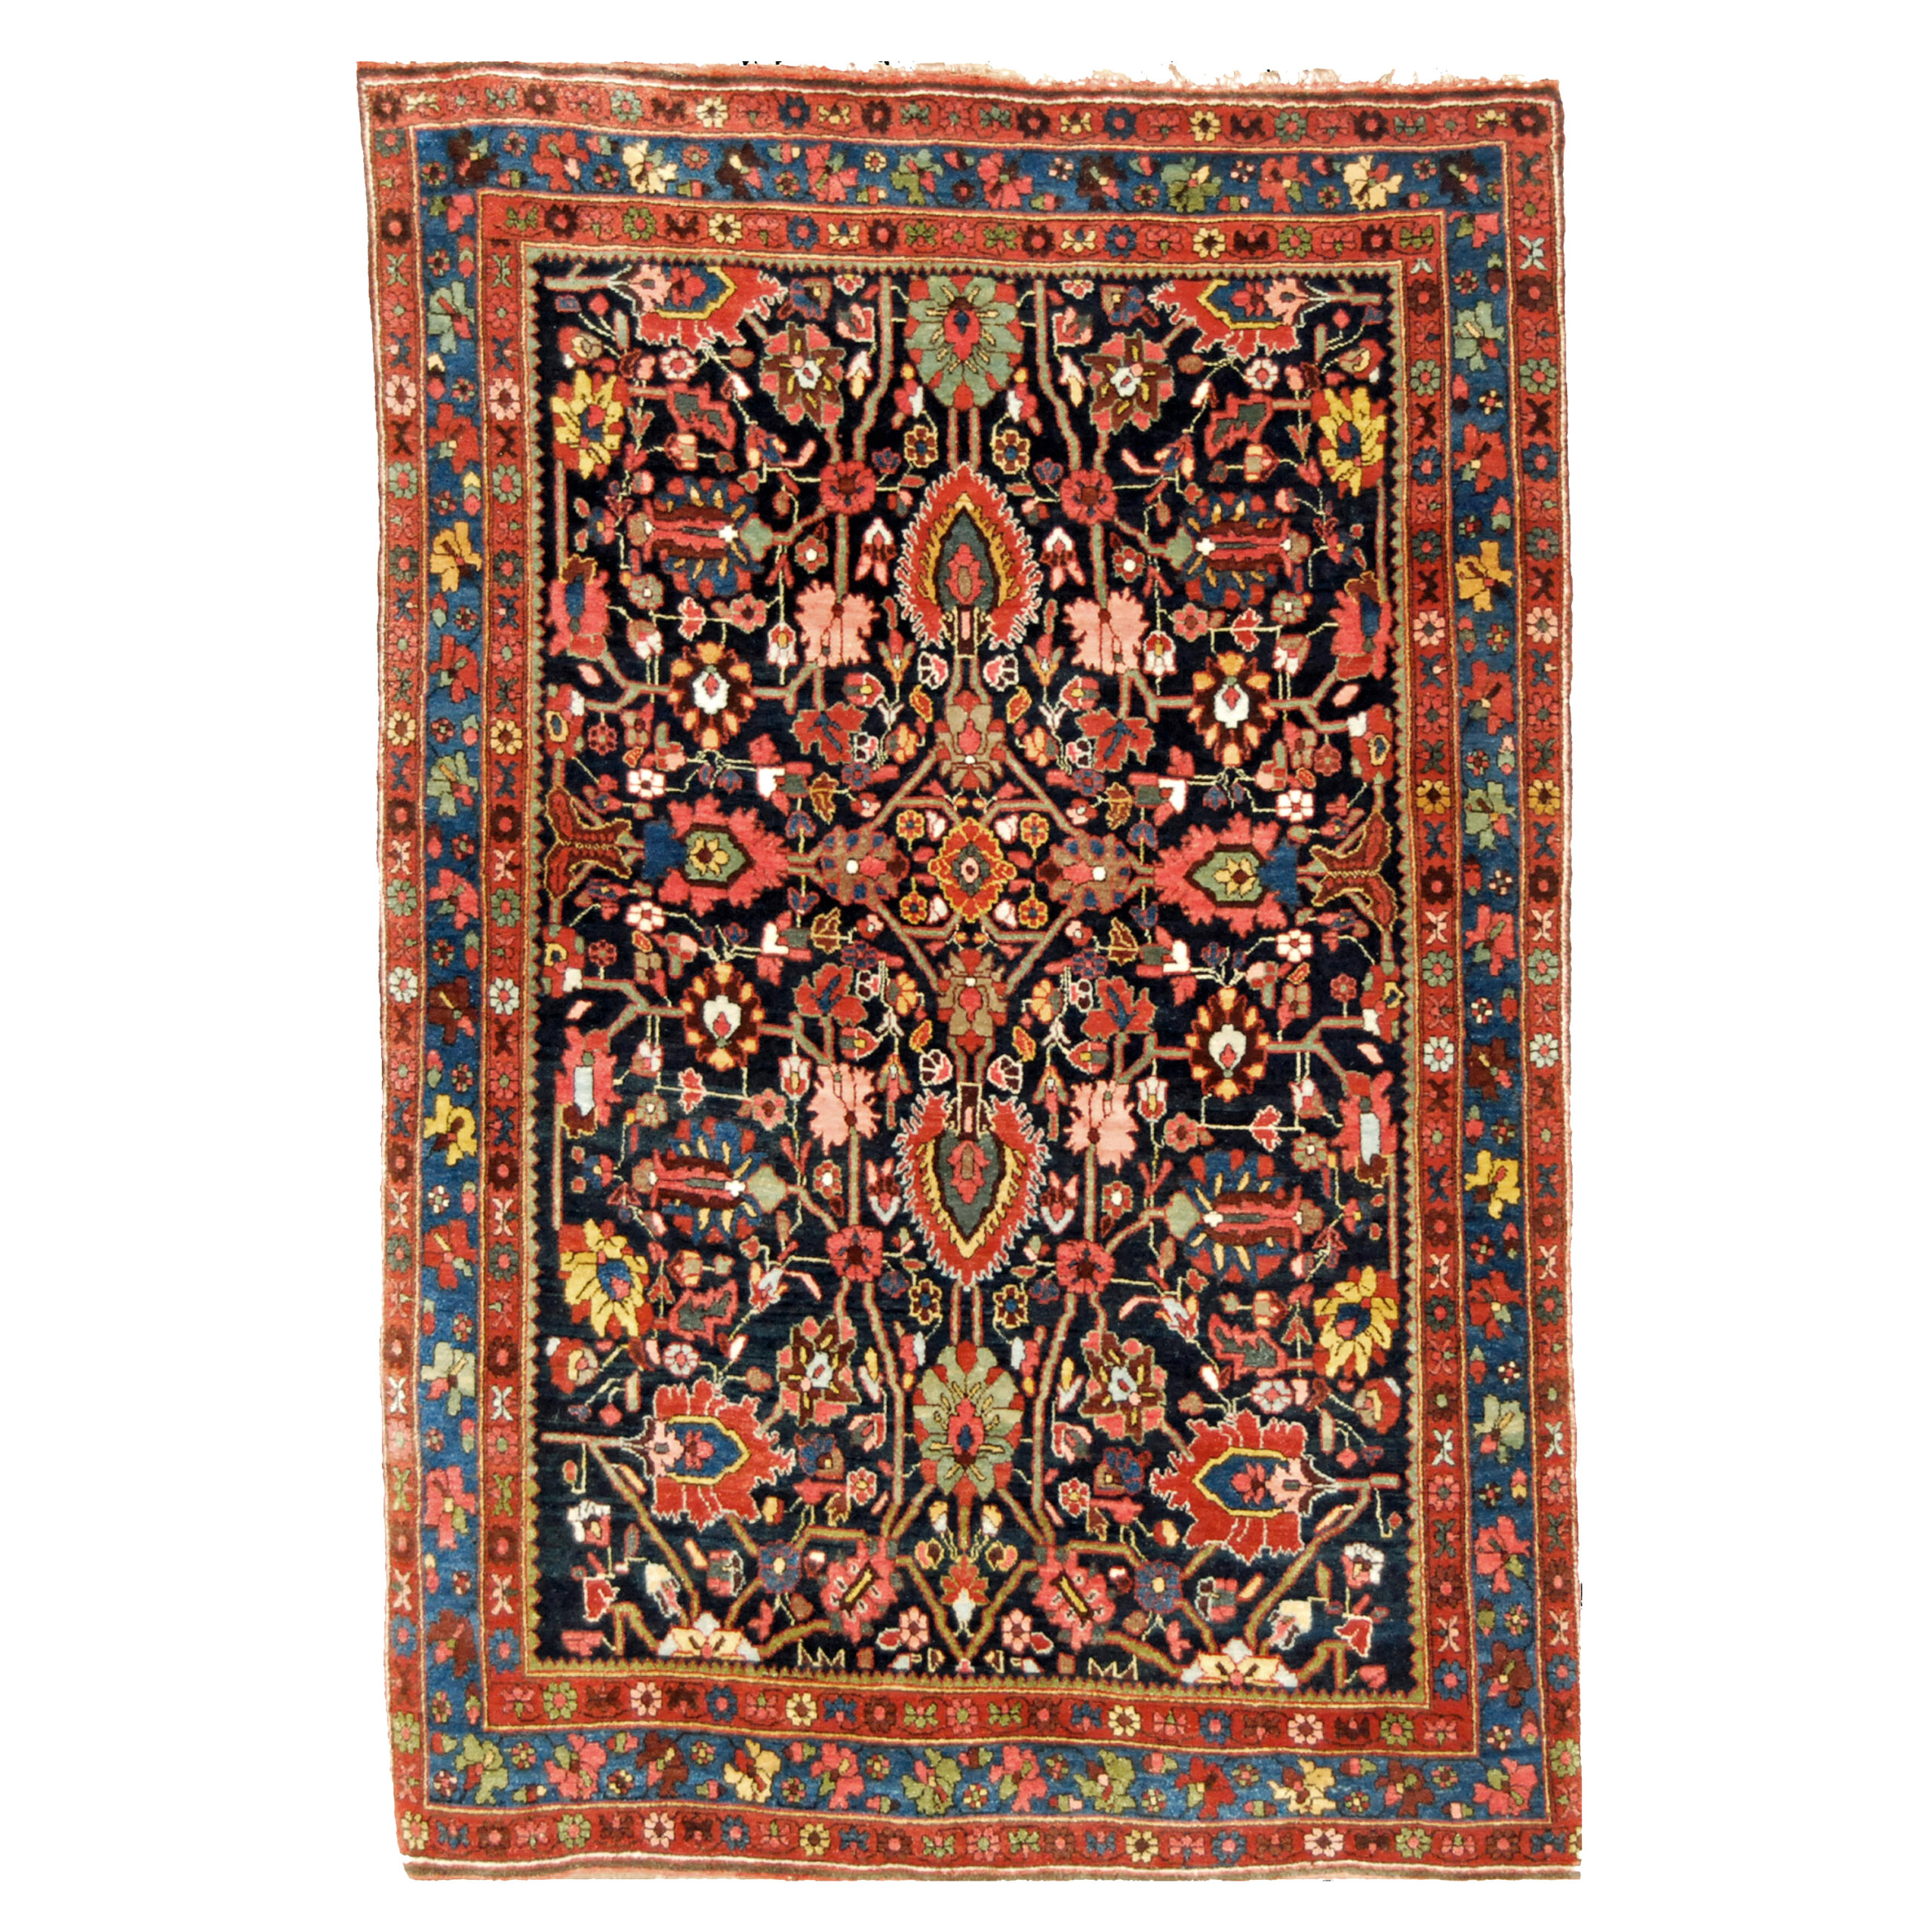 Douglas Stock Gallery Antique Oriental Rug Research Archives, antique rugs Boston,MA area - An antique Persian Bidjar rug with palmettes and flowers on a navy blue field, circa 1920